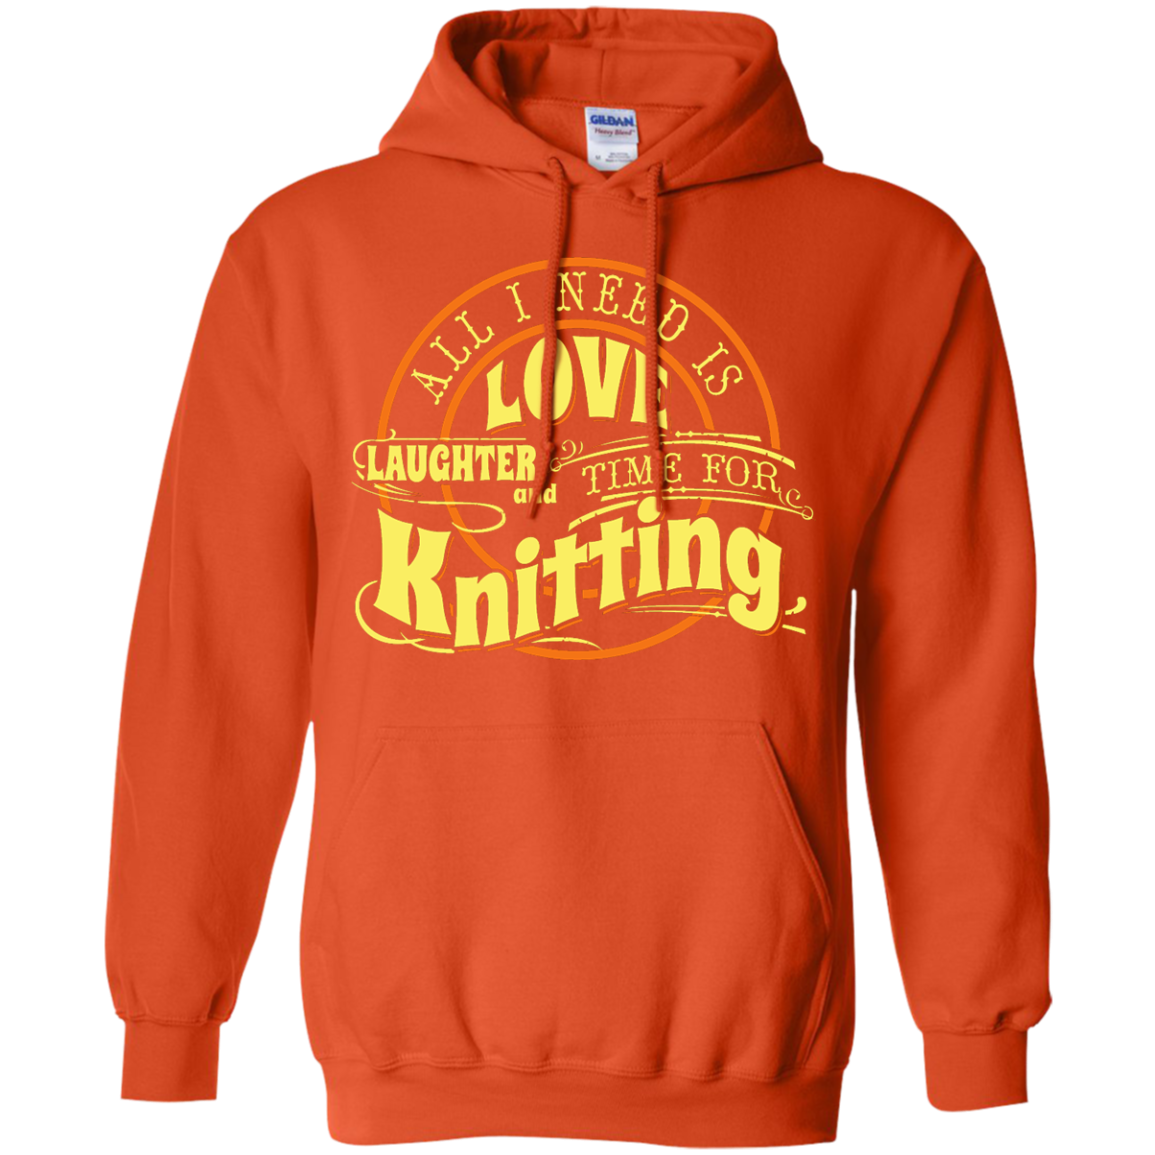 Time for Knitting (yellow) Pullover Hoodies - Crafter4Life - 9